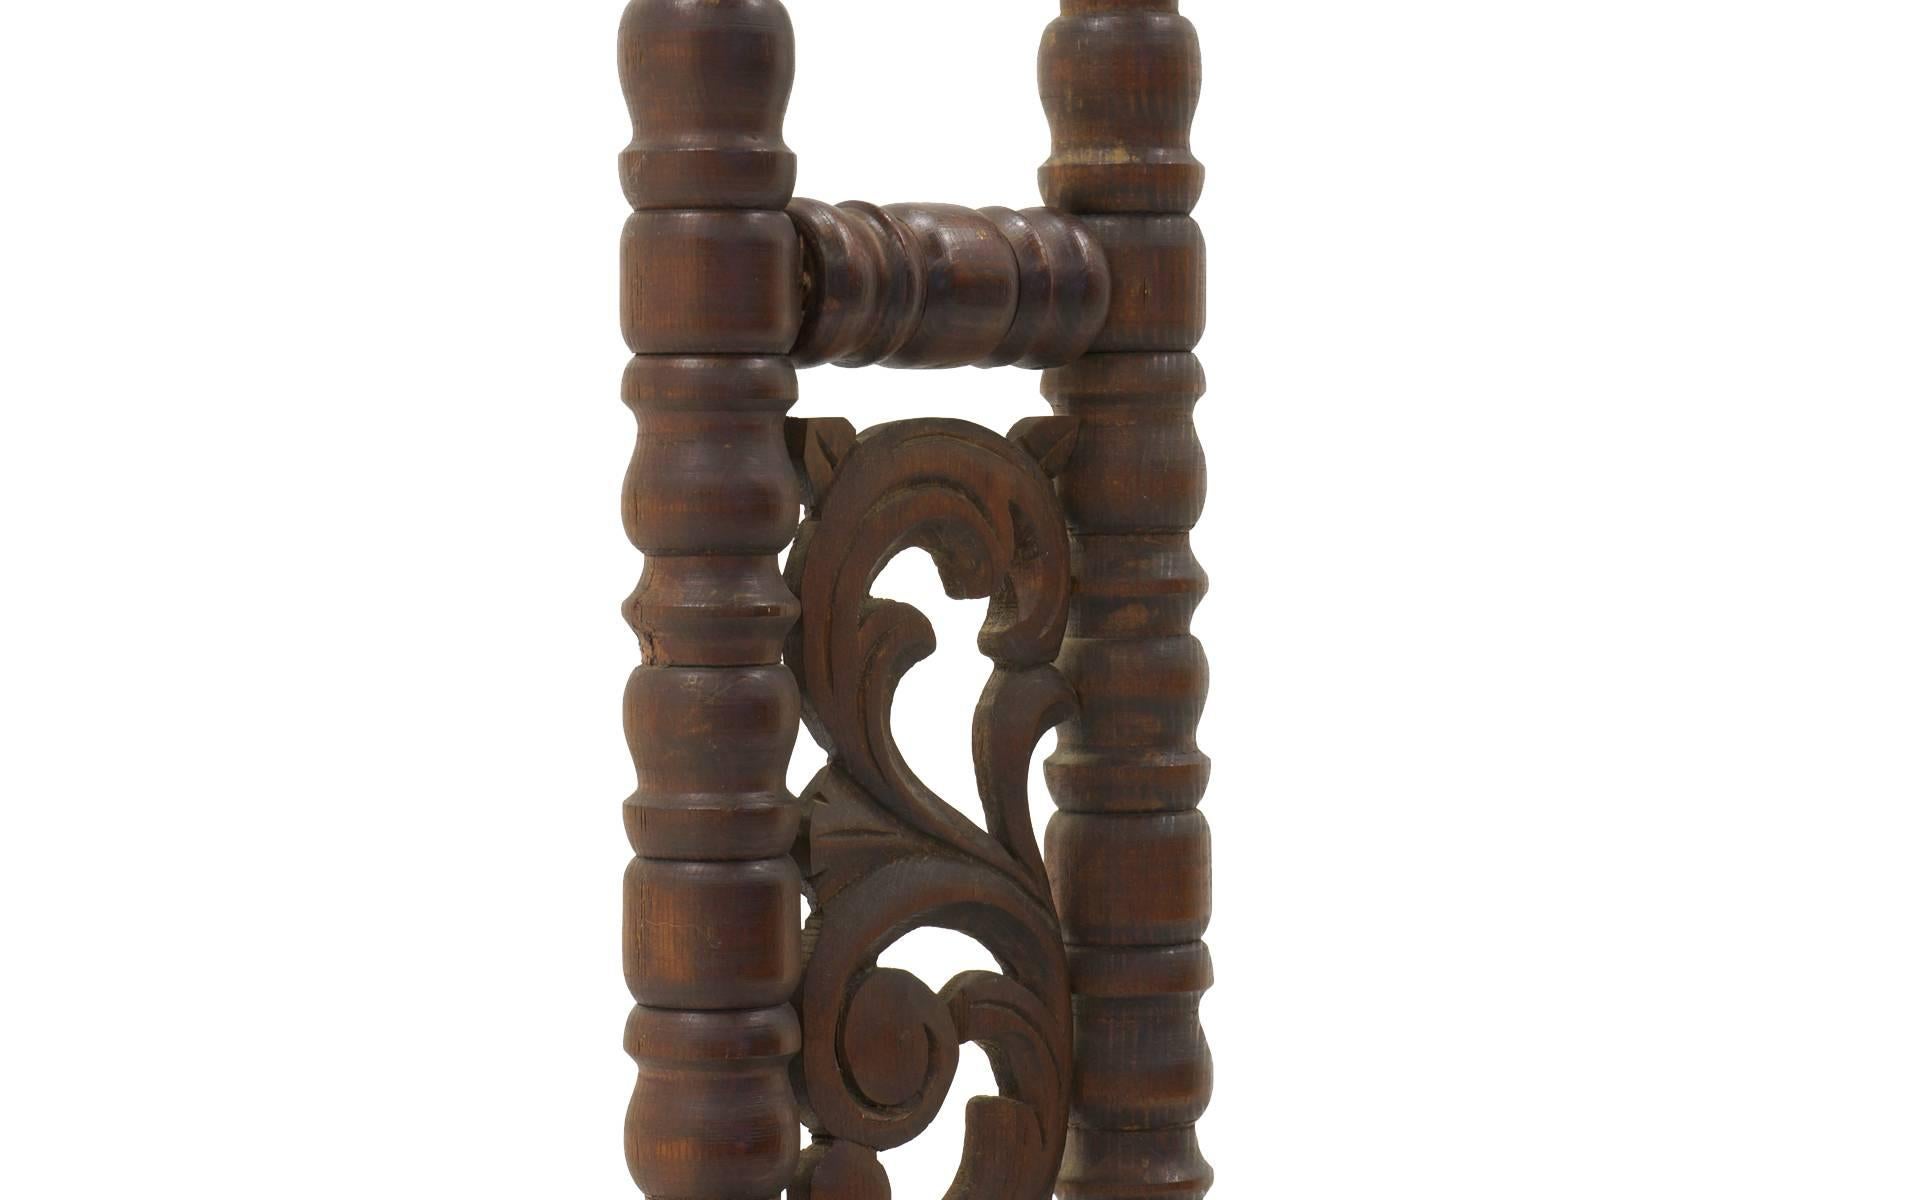 Mid-20th Century Pair of Moroccan / African Teak Accent Chairs, Unusual Sculptural Design